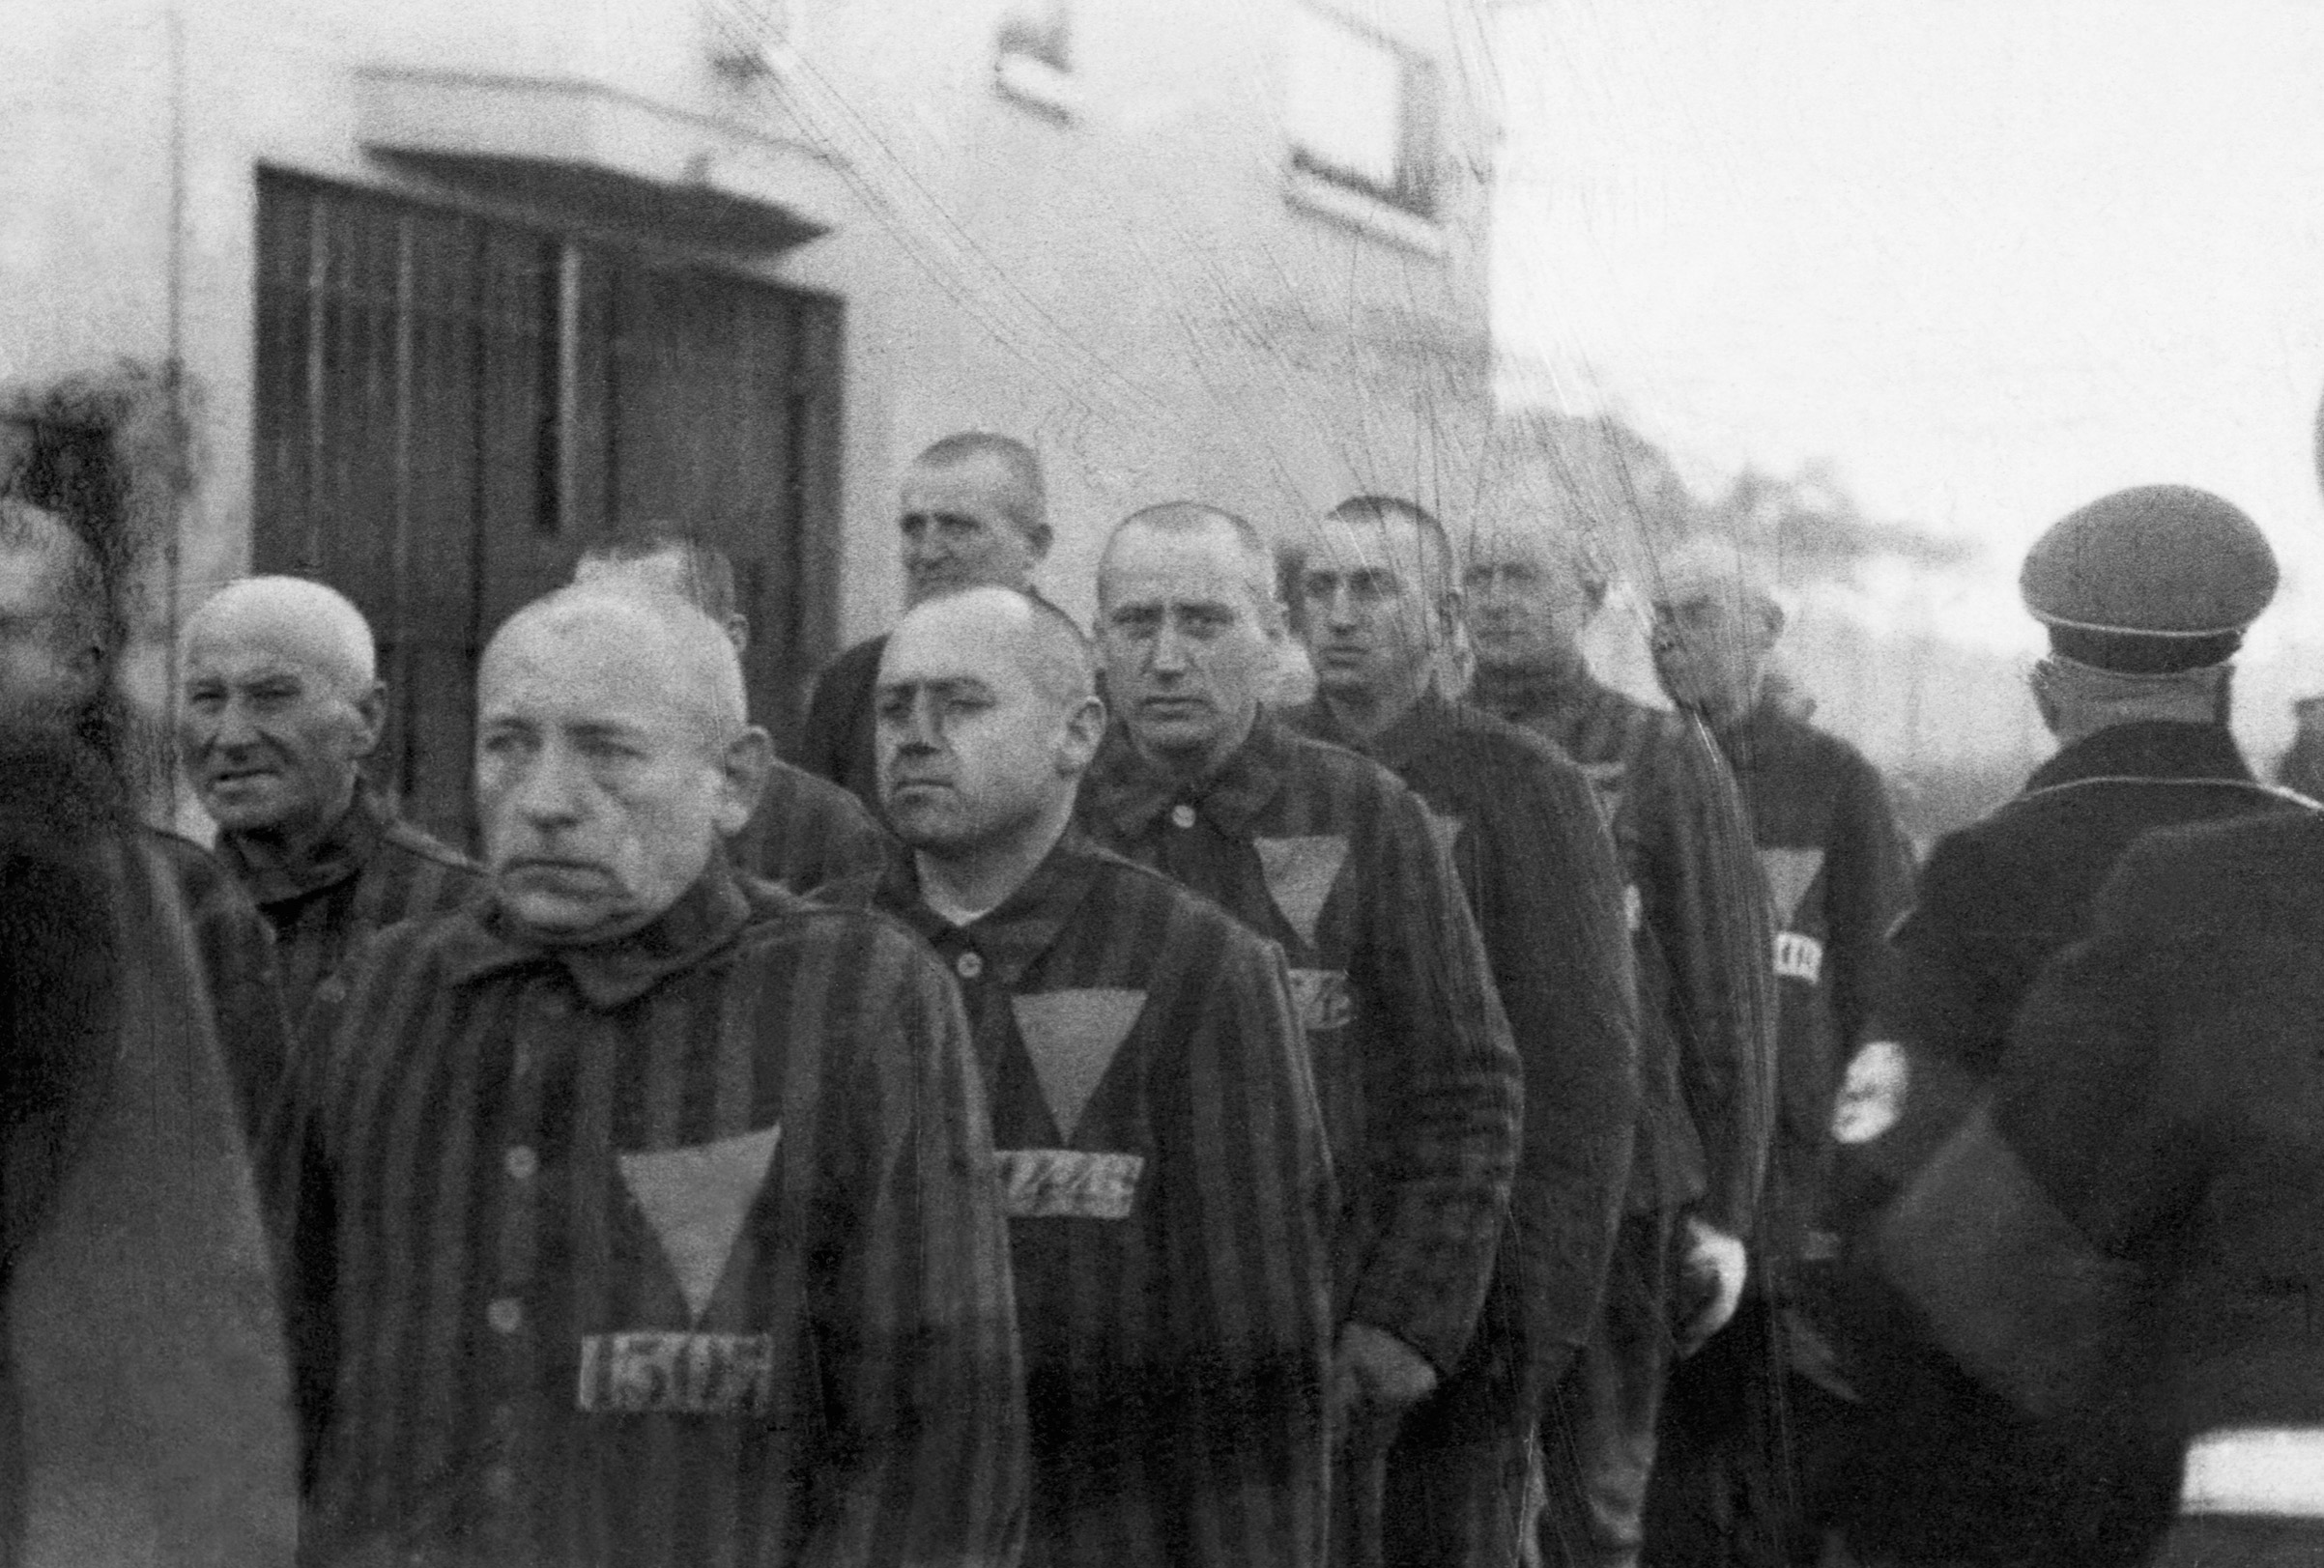 Prisoners wearing pink triangles on their uniforms are marched outdoors by Nazi guards at the Sachsenhausen concentration camp in Germany on Dec. 19, 1938. (CORBIS/Corbis—Getty Images)